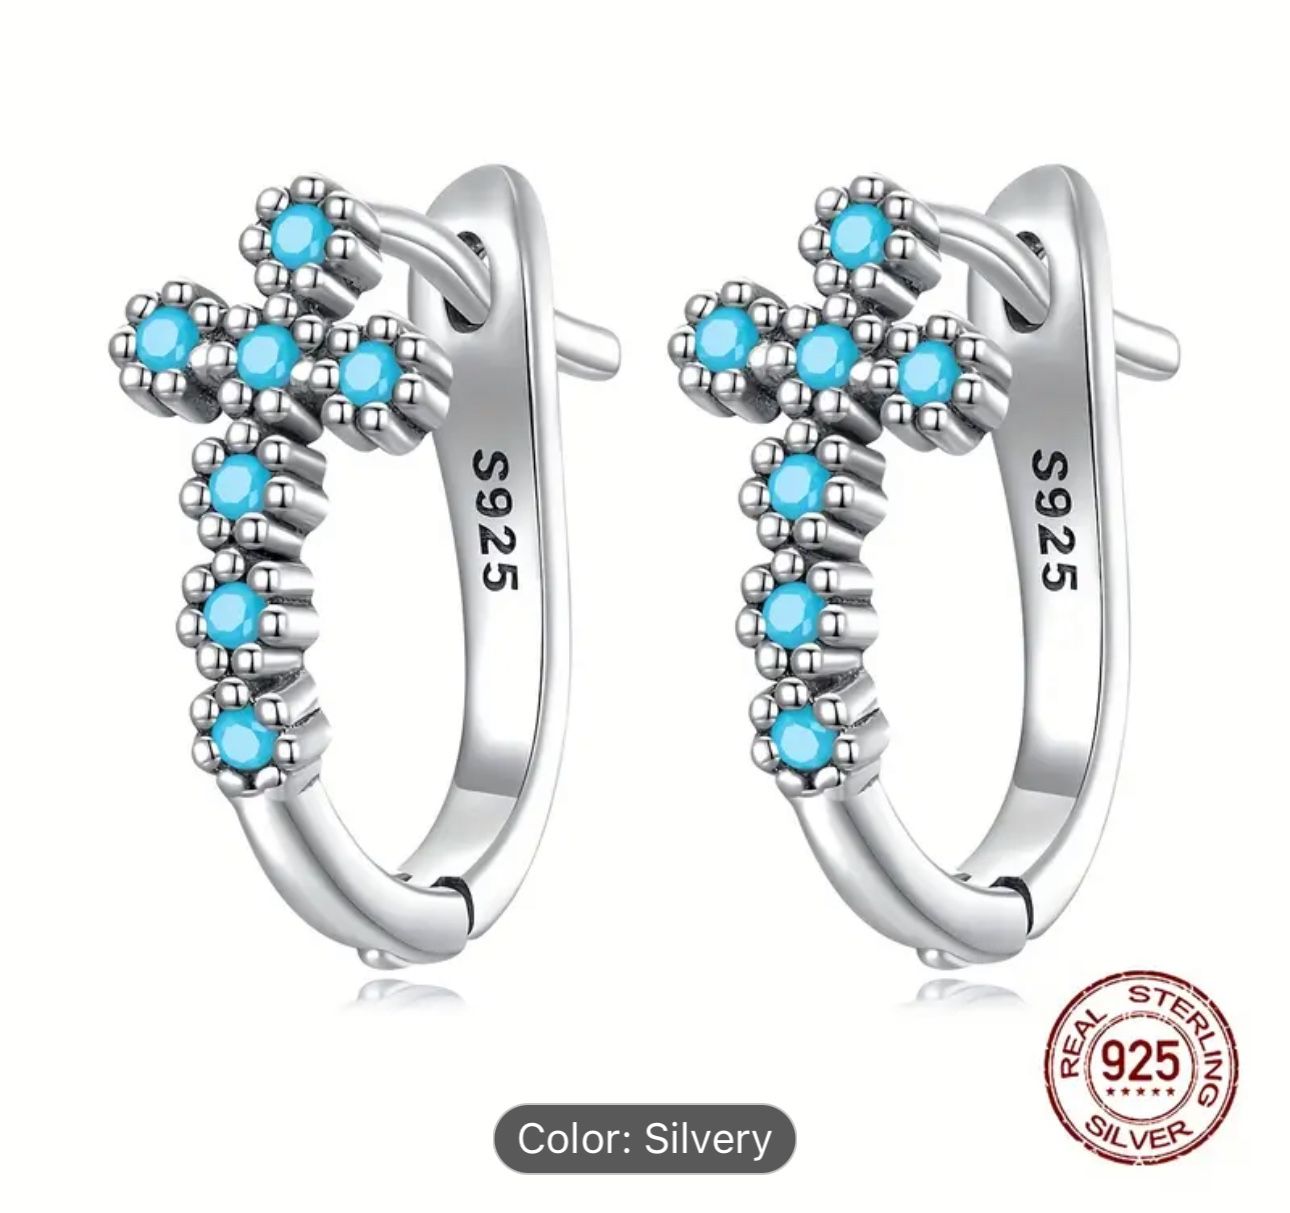 Elegant Boho-Chic 925 Silver Turquoise Cross Hoop Earrings – Ideal for Daily Style & Special Gifts